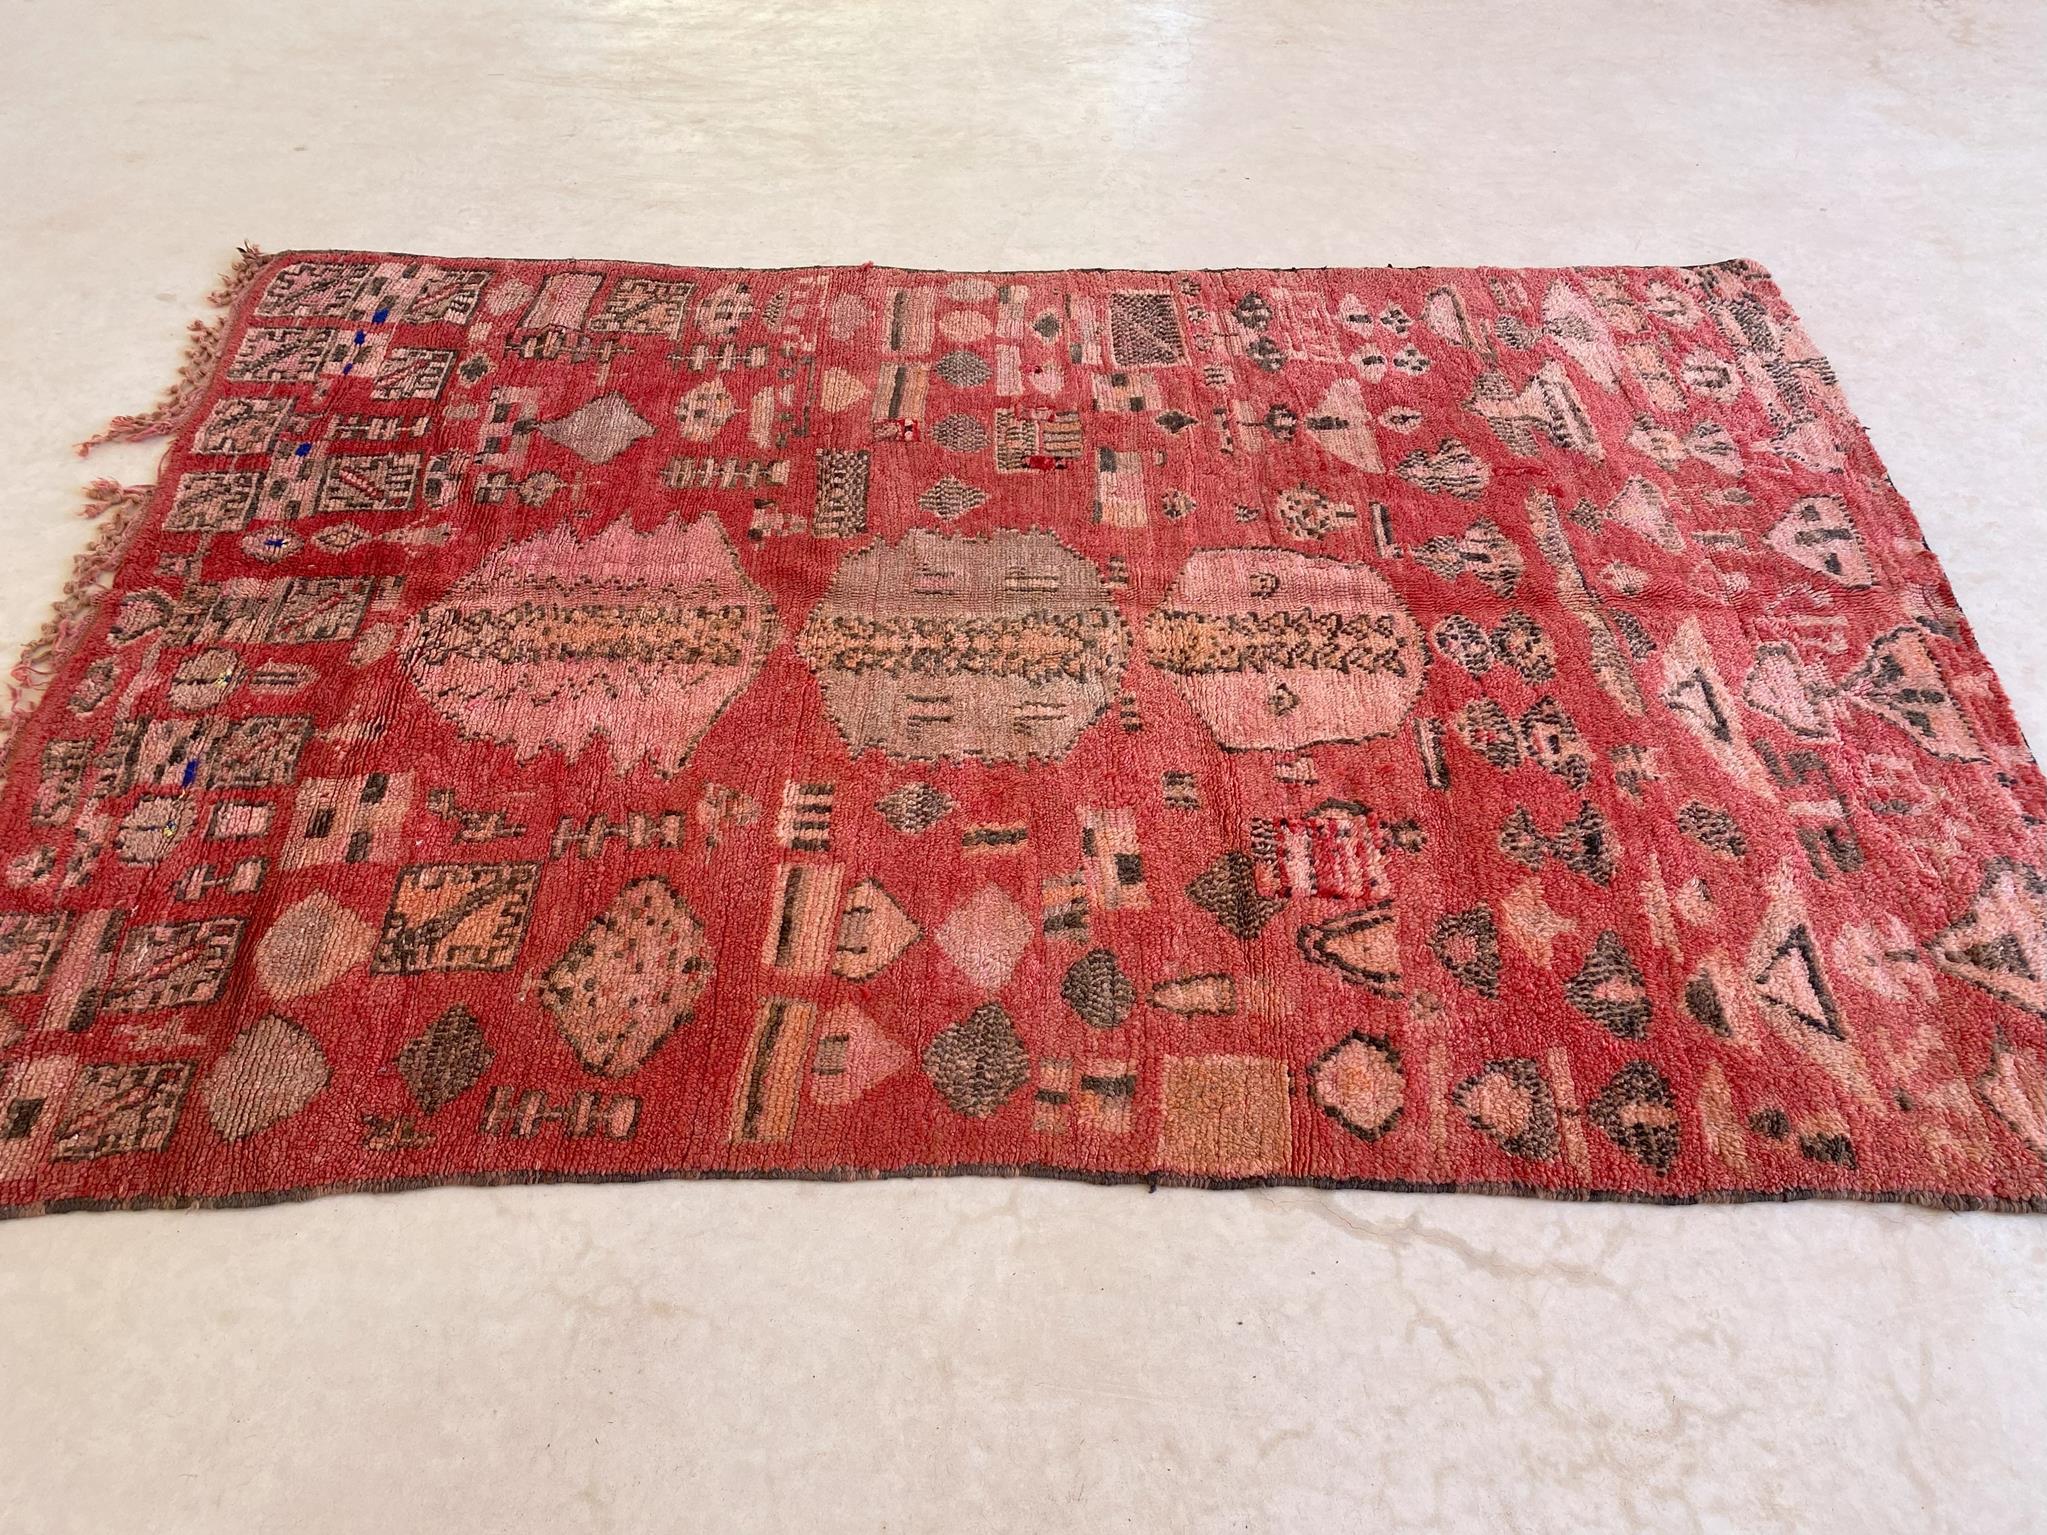 This rug is a collector piece! It is called a Rehamna rug and was probably made in the area around the plains of Marrakech, Morocco.

The background color of this rug is a subtle red with black and pink designs. The rich composition is made of three